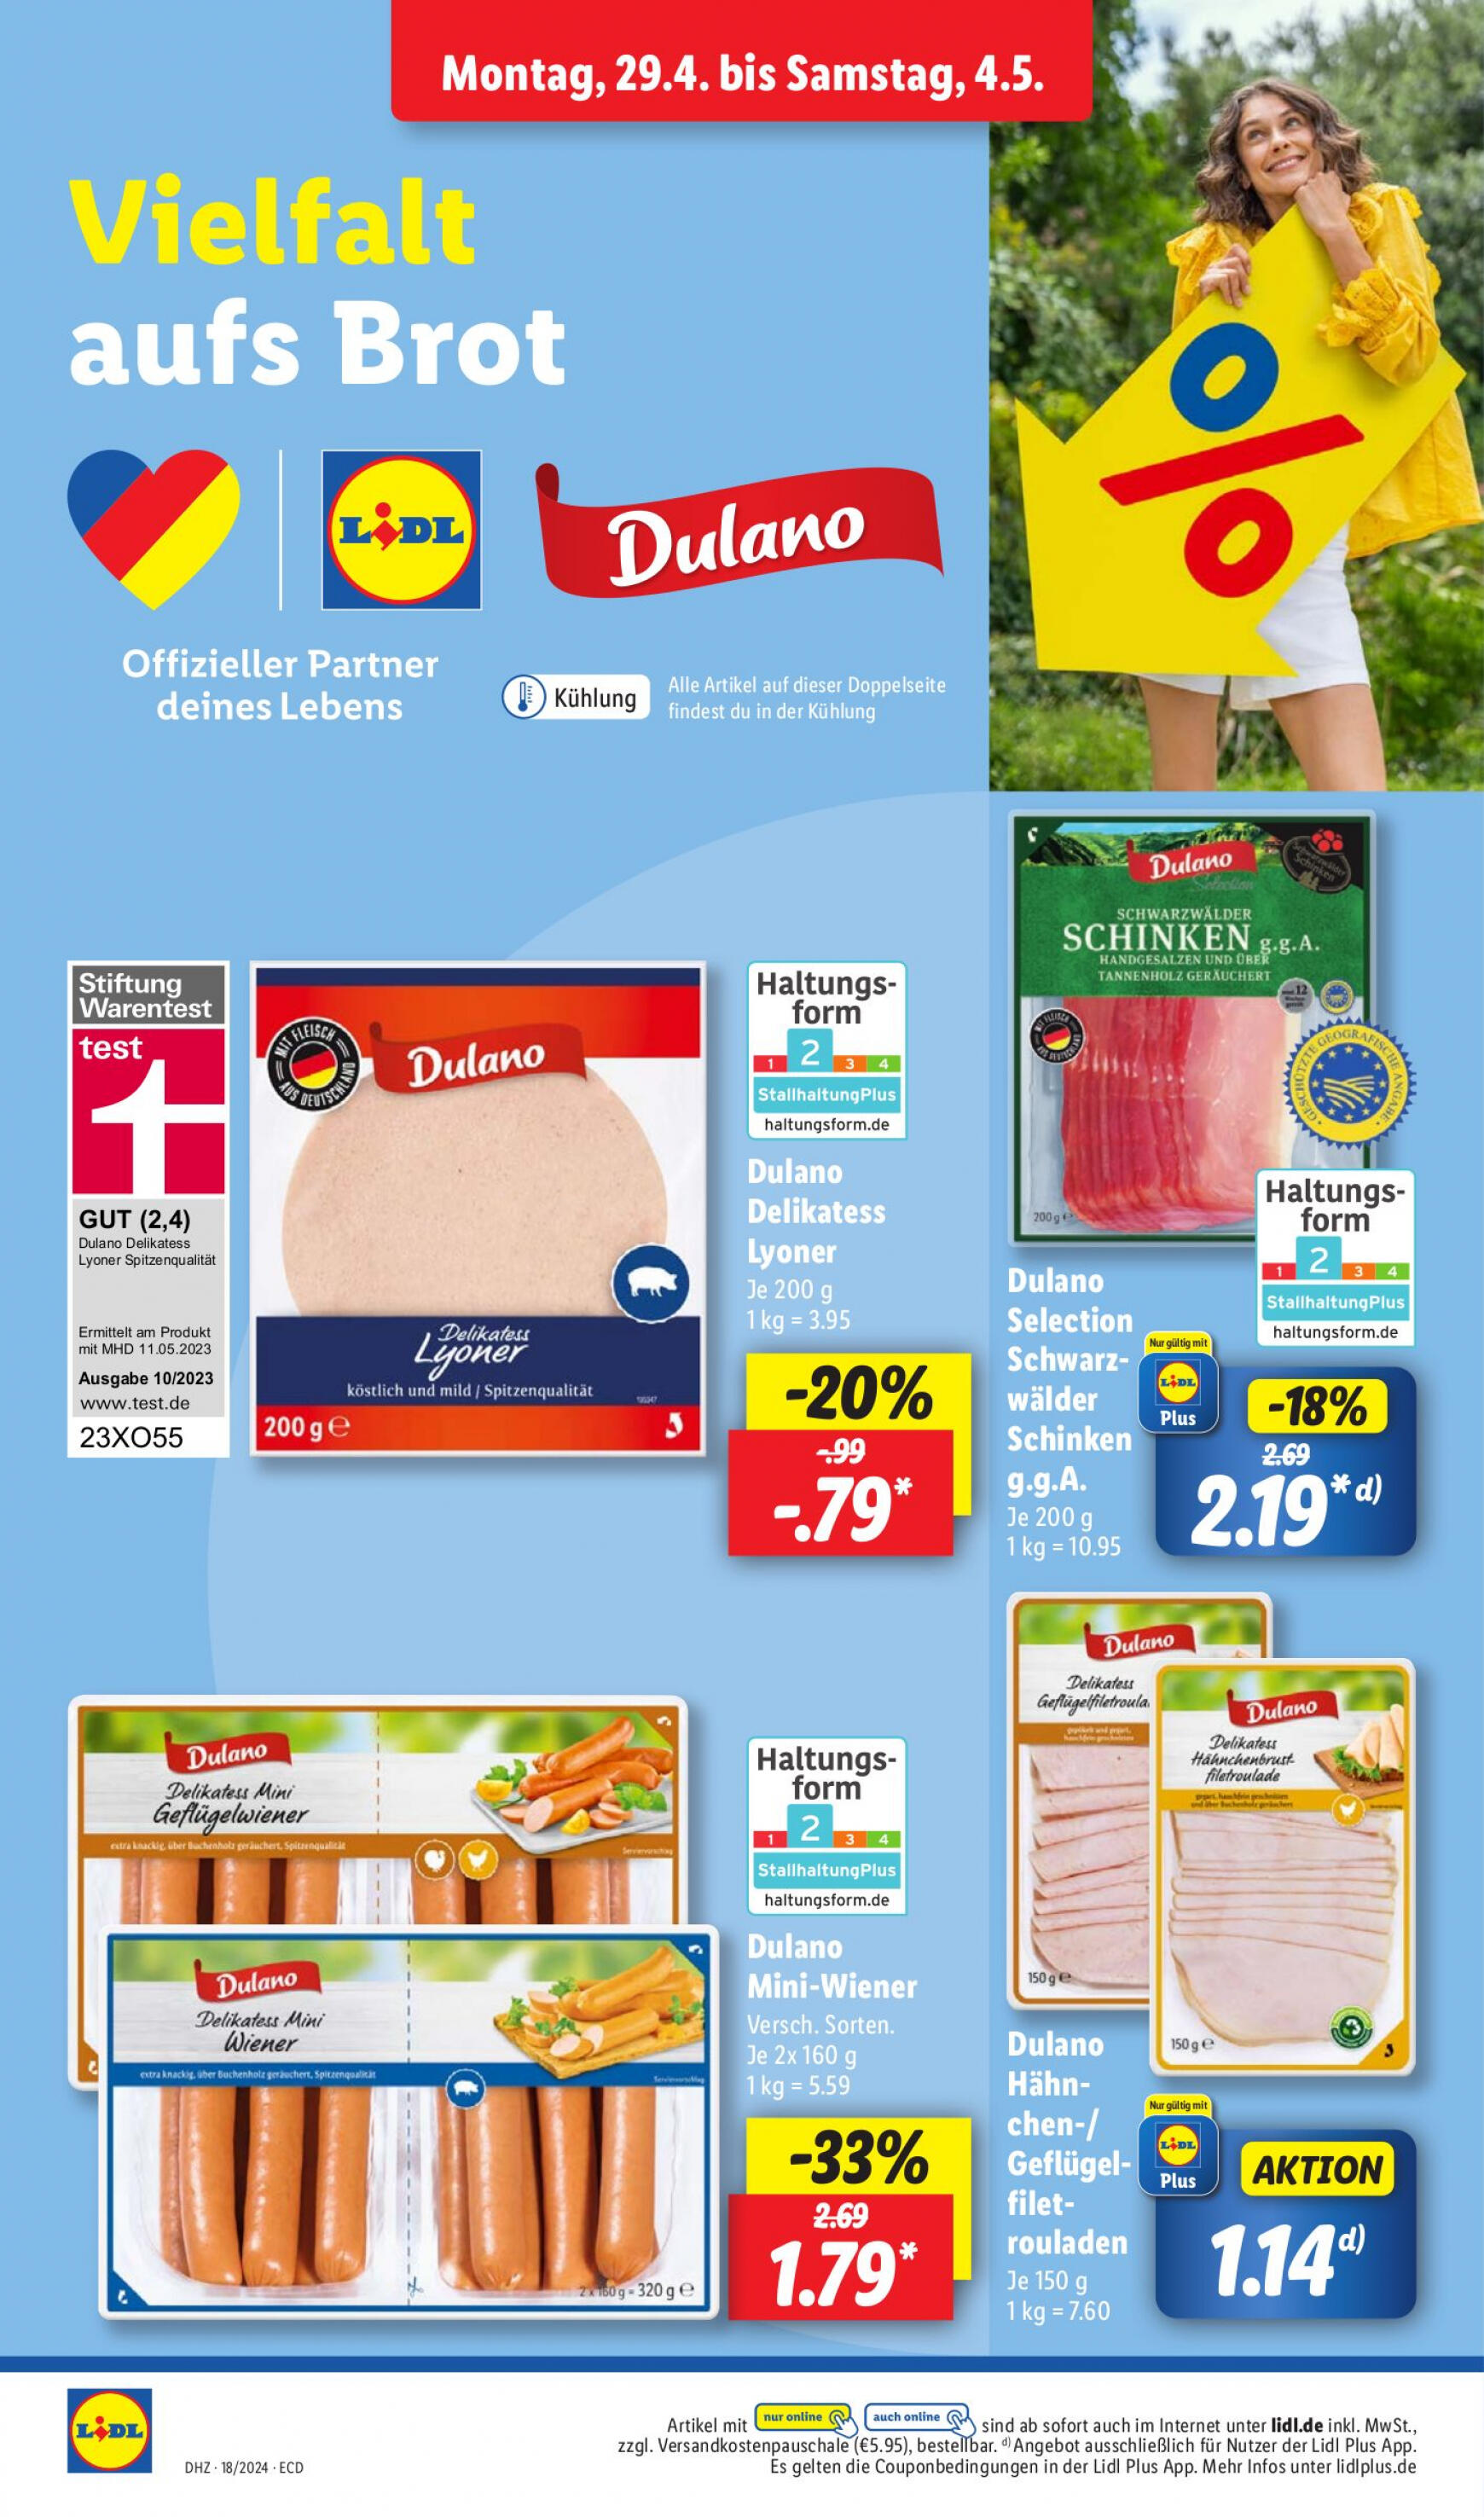 lidl - Flyer Lidl aktuell 29.04. - 04.05. - page: 8